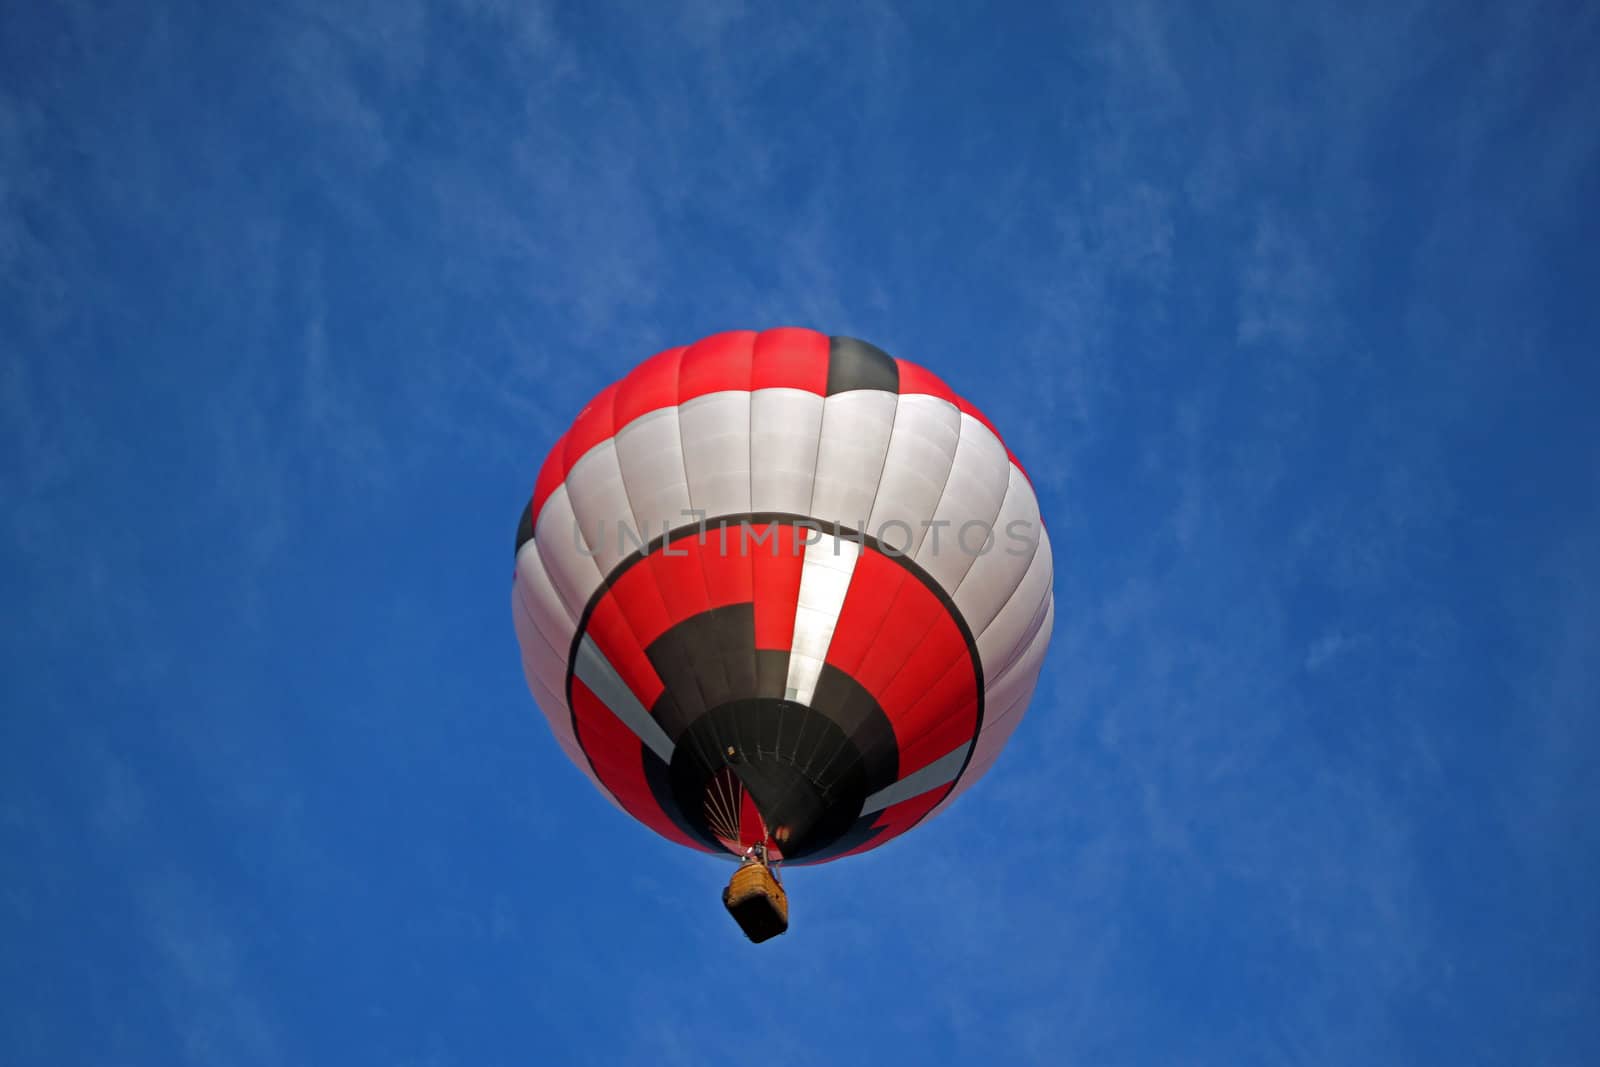 Hot air balloon on blue background with red black and white highlights.